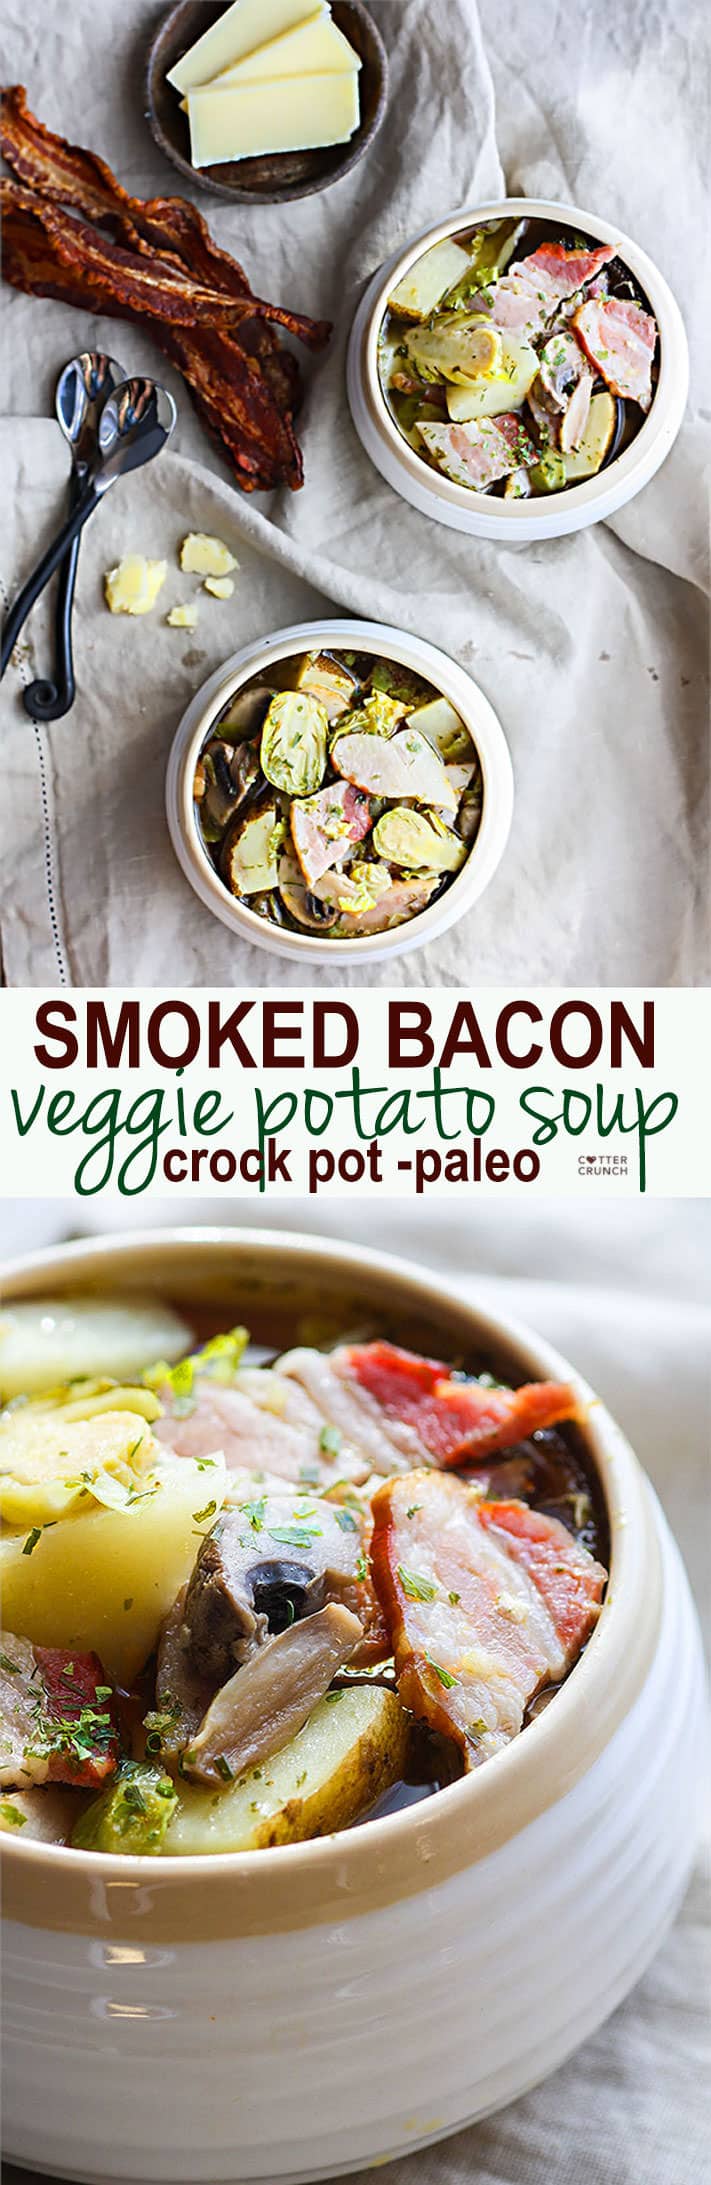 This smoked bacon veggie soup recipe is gluten free, grain free, Paleo friendly, and packed with simple, wholesome ingredients and flavor. Easy to make in a slow cooker or the oven! Get the recipe at CotterCrunch.com